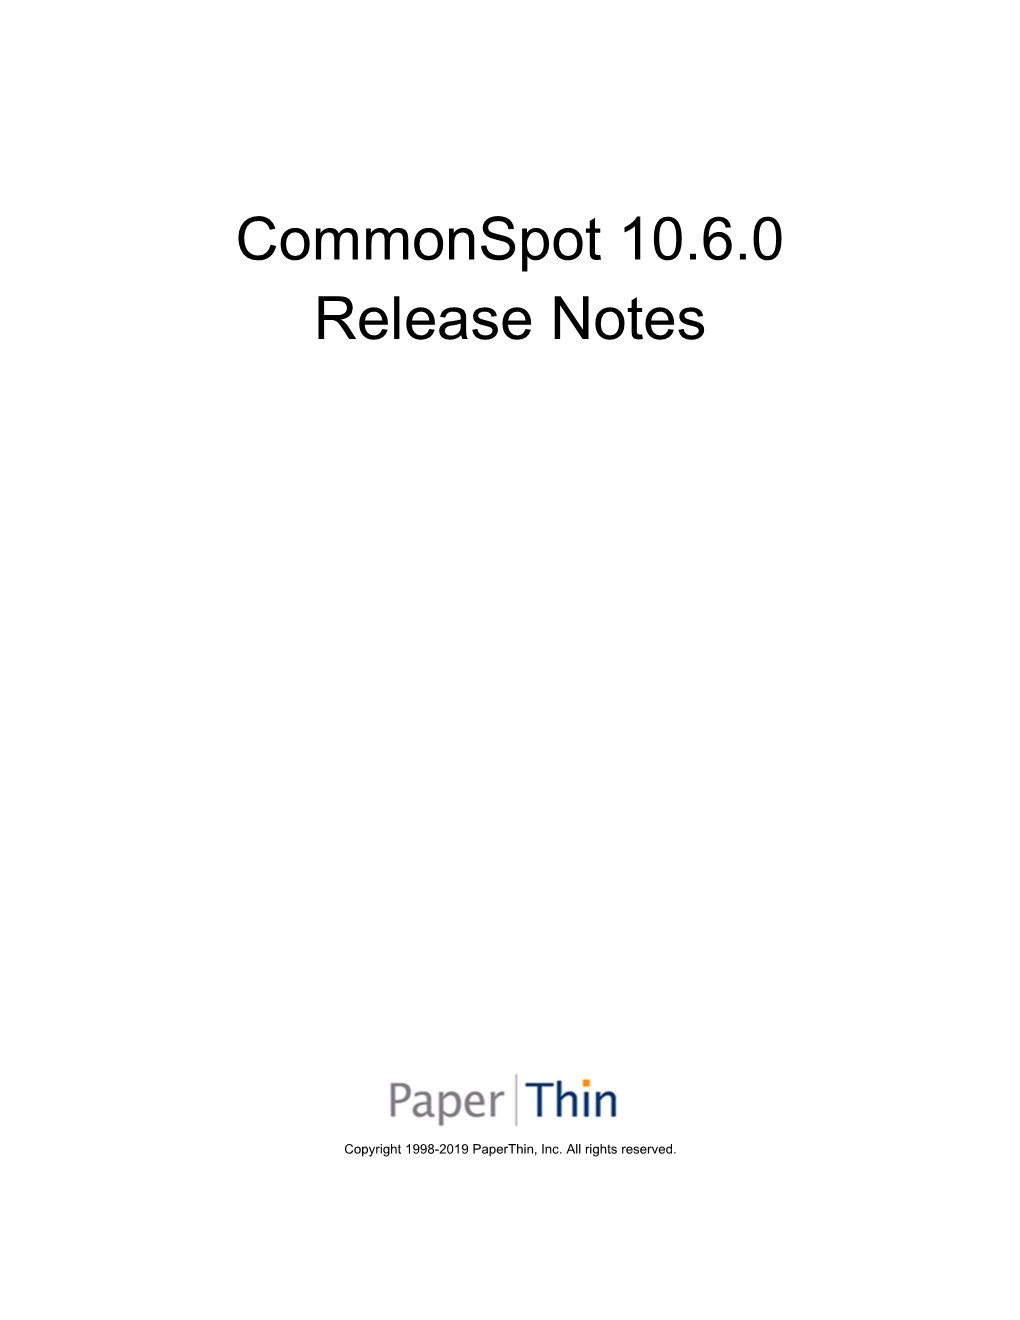 Commonspot 10.6.0 Release Notes